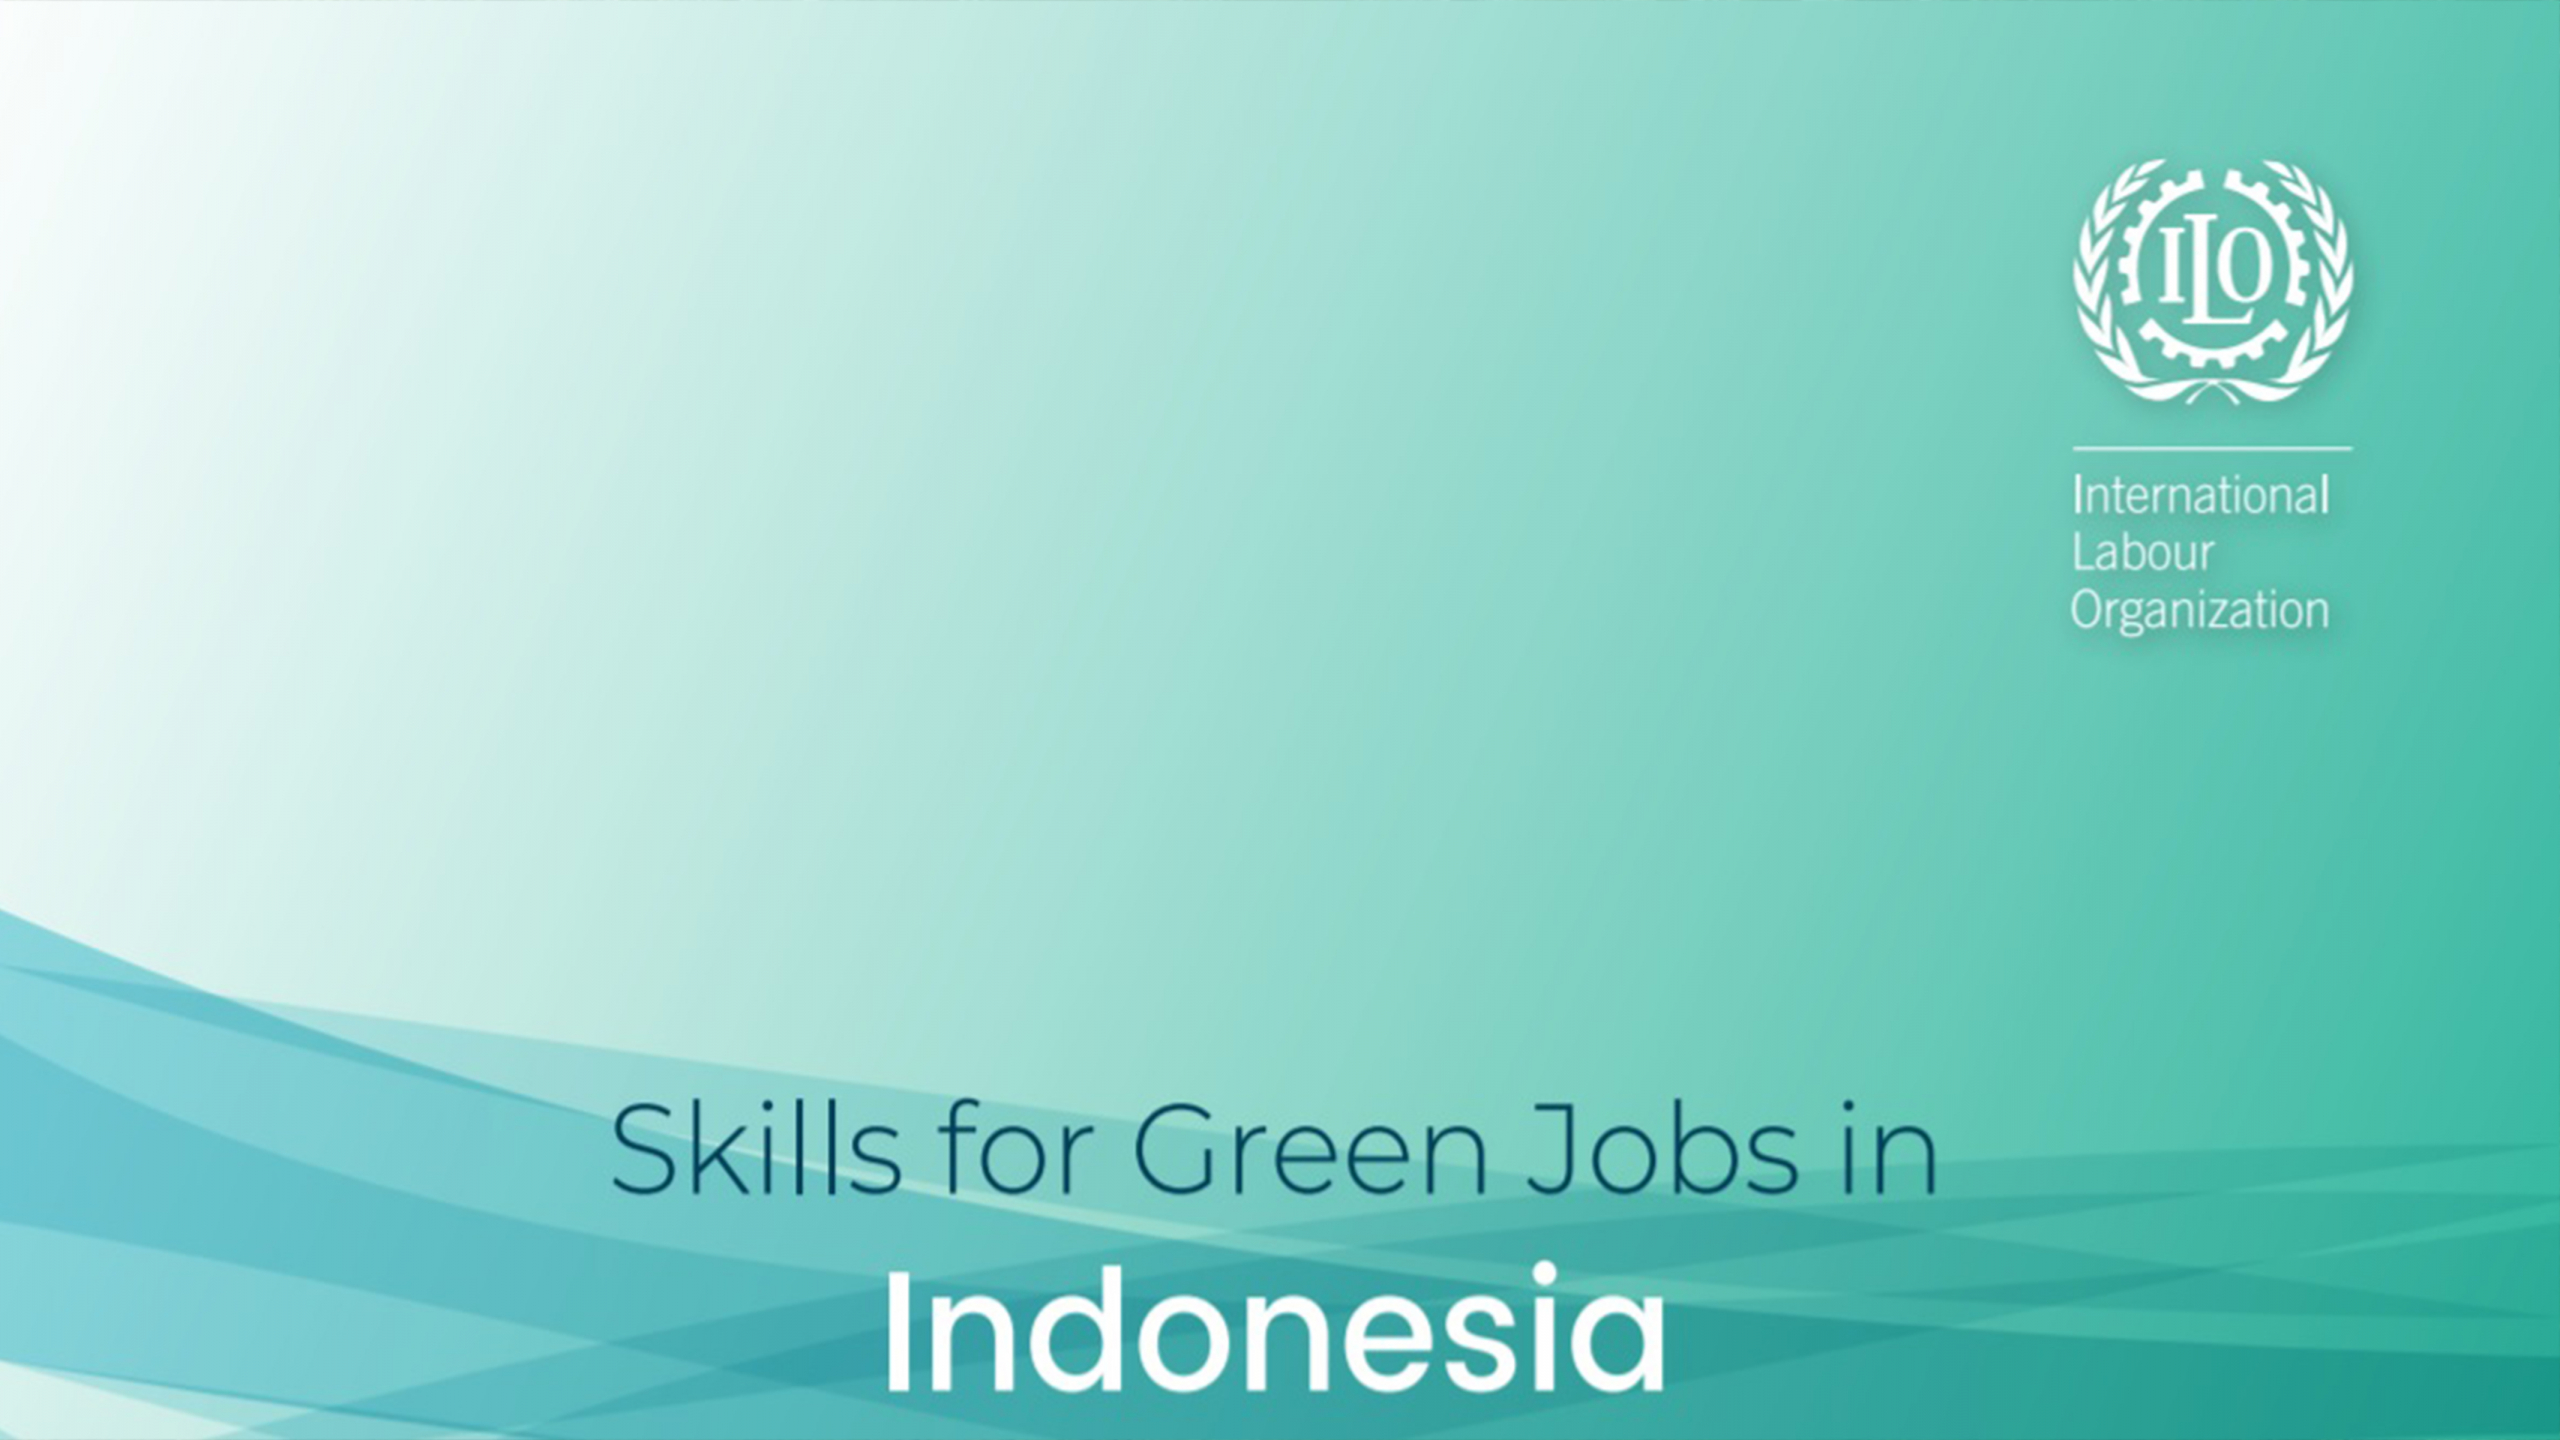 Skill for Green Jobs in Indonesia